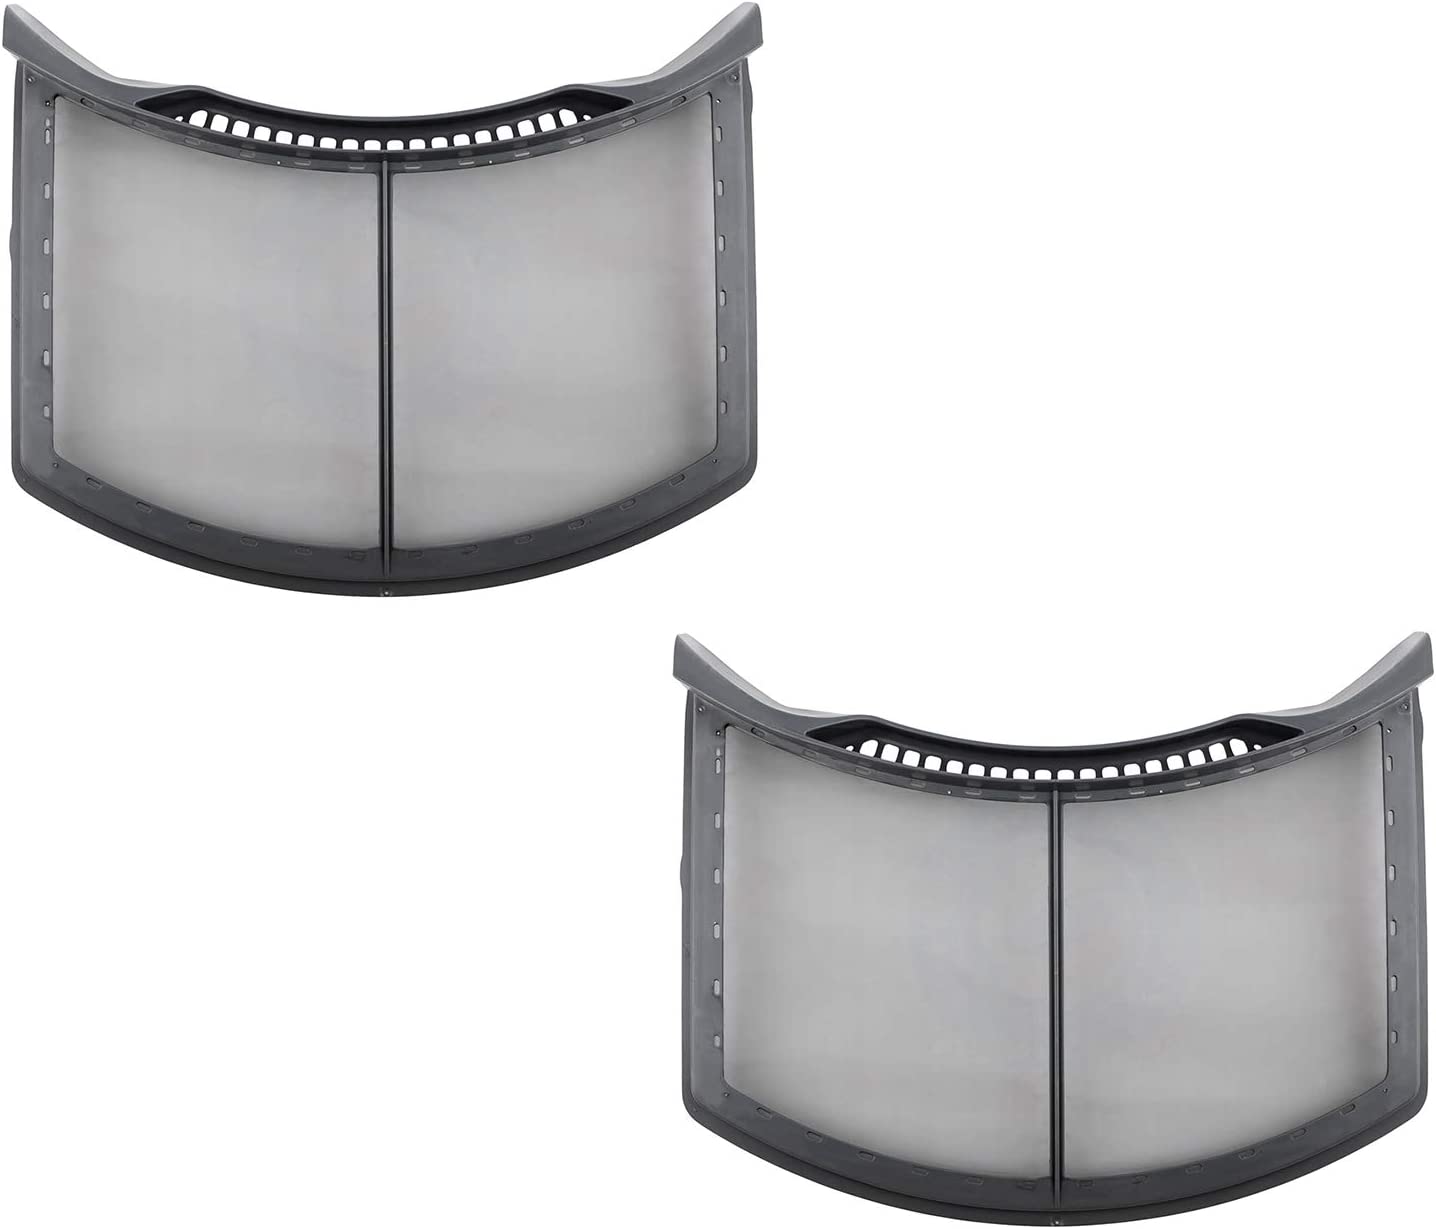 2 x 134793600 Lint Screen Filter Compatible with Electrolux, Frigidaire Dryer - AP4368342, 1482988, 7134793600